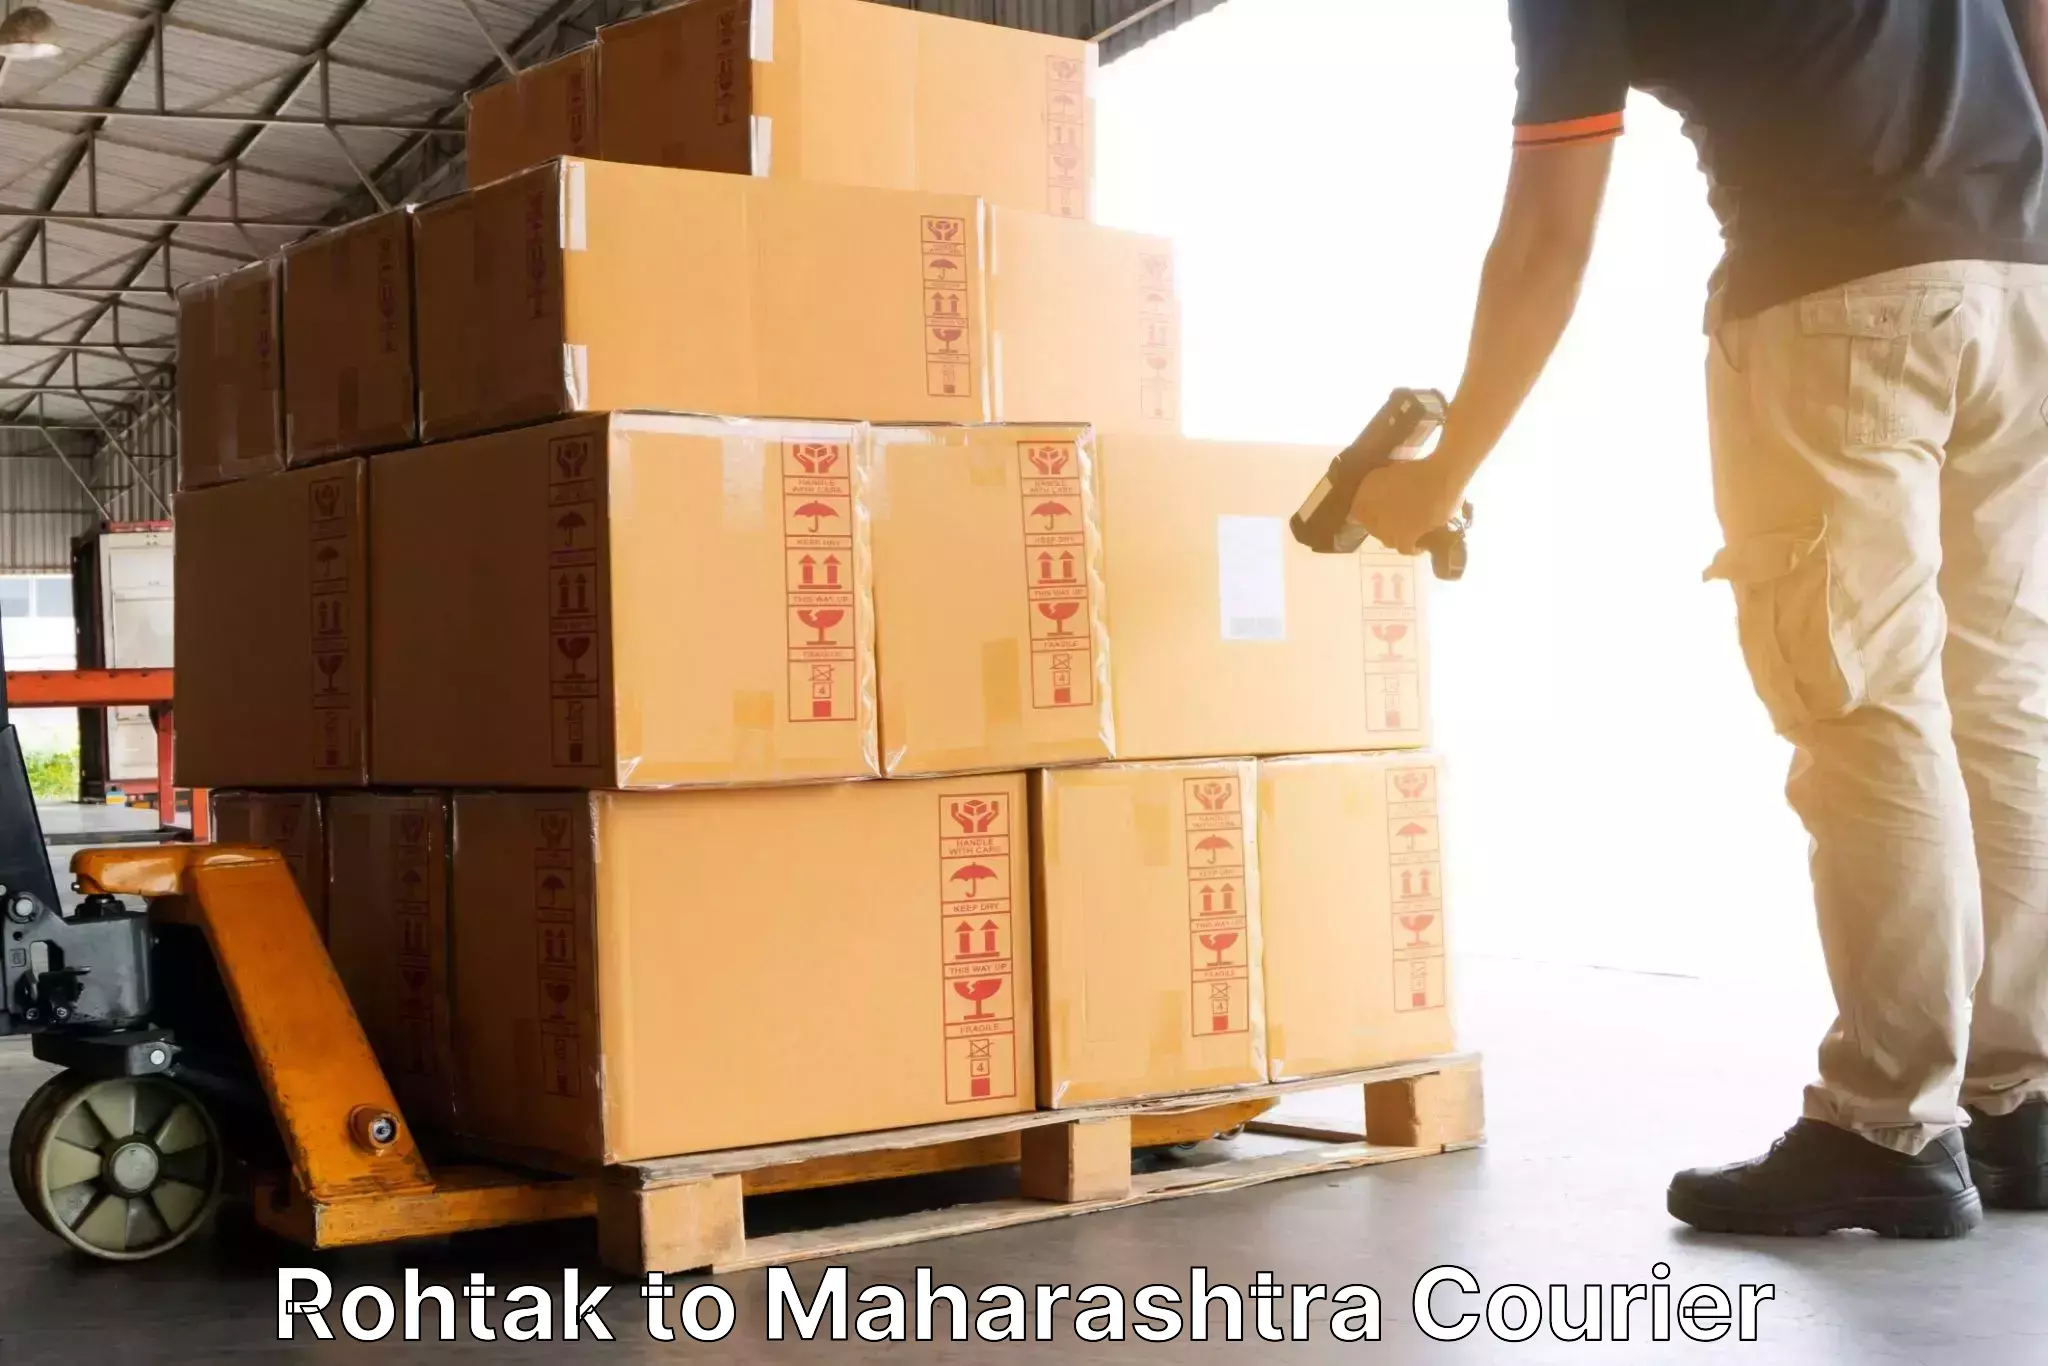 Efficient package consolidation in Rohtak to Nashik